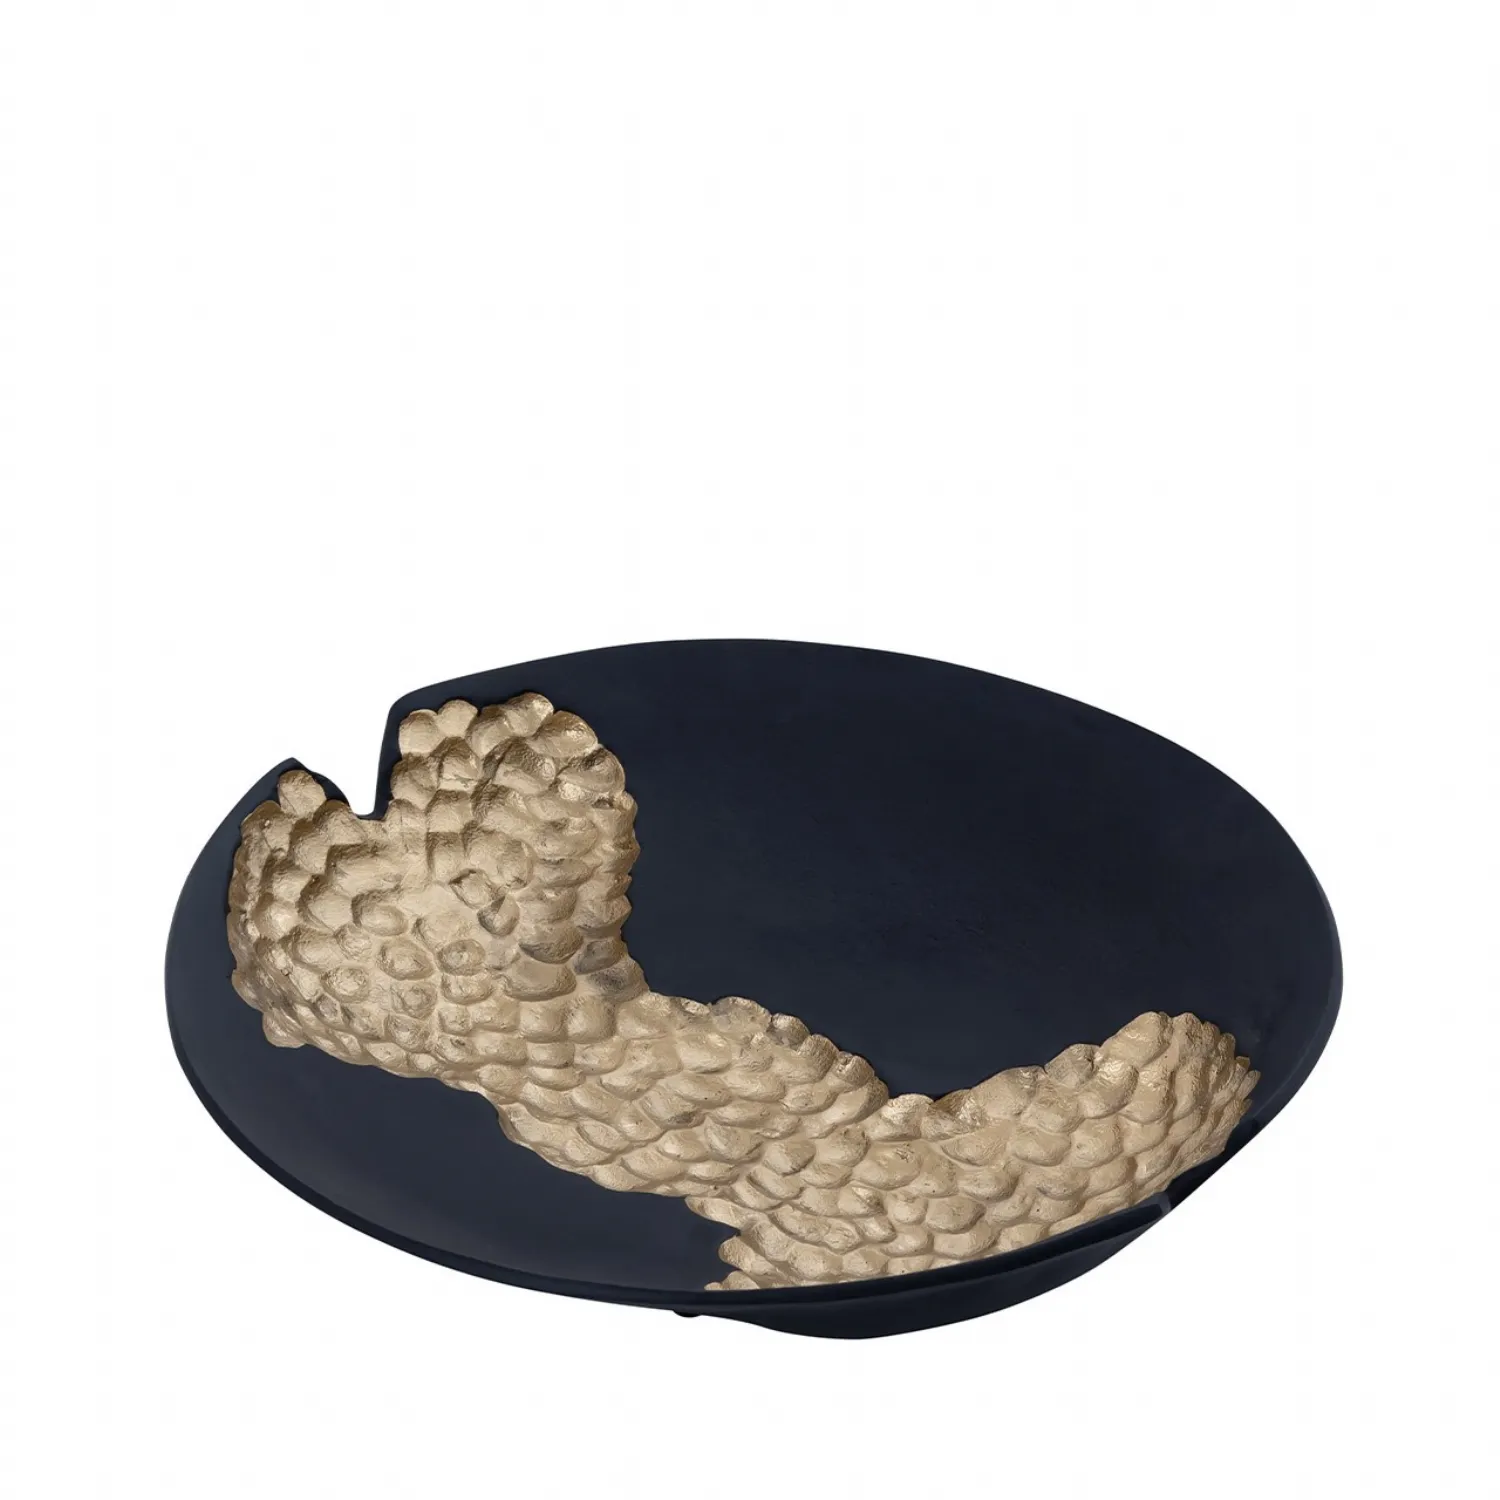 40cm Black With Gold Metal Dish